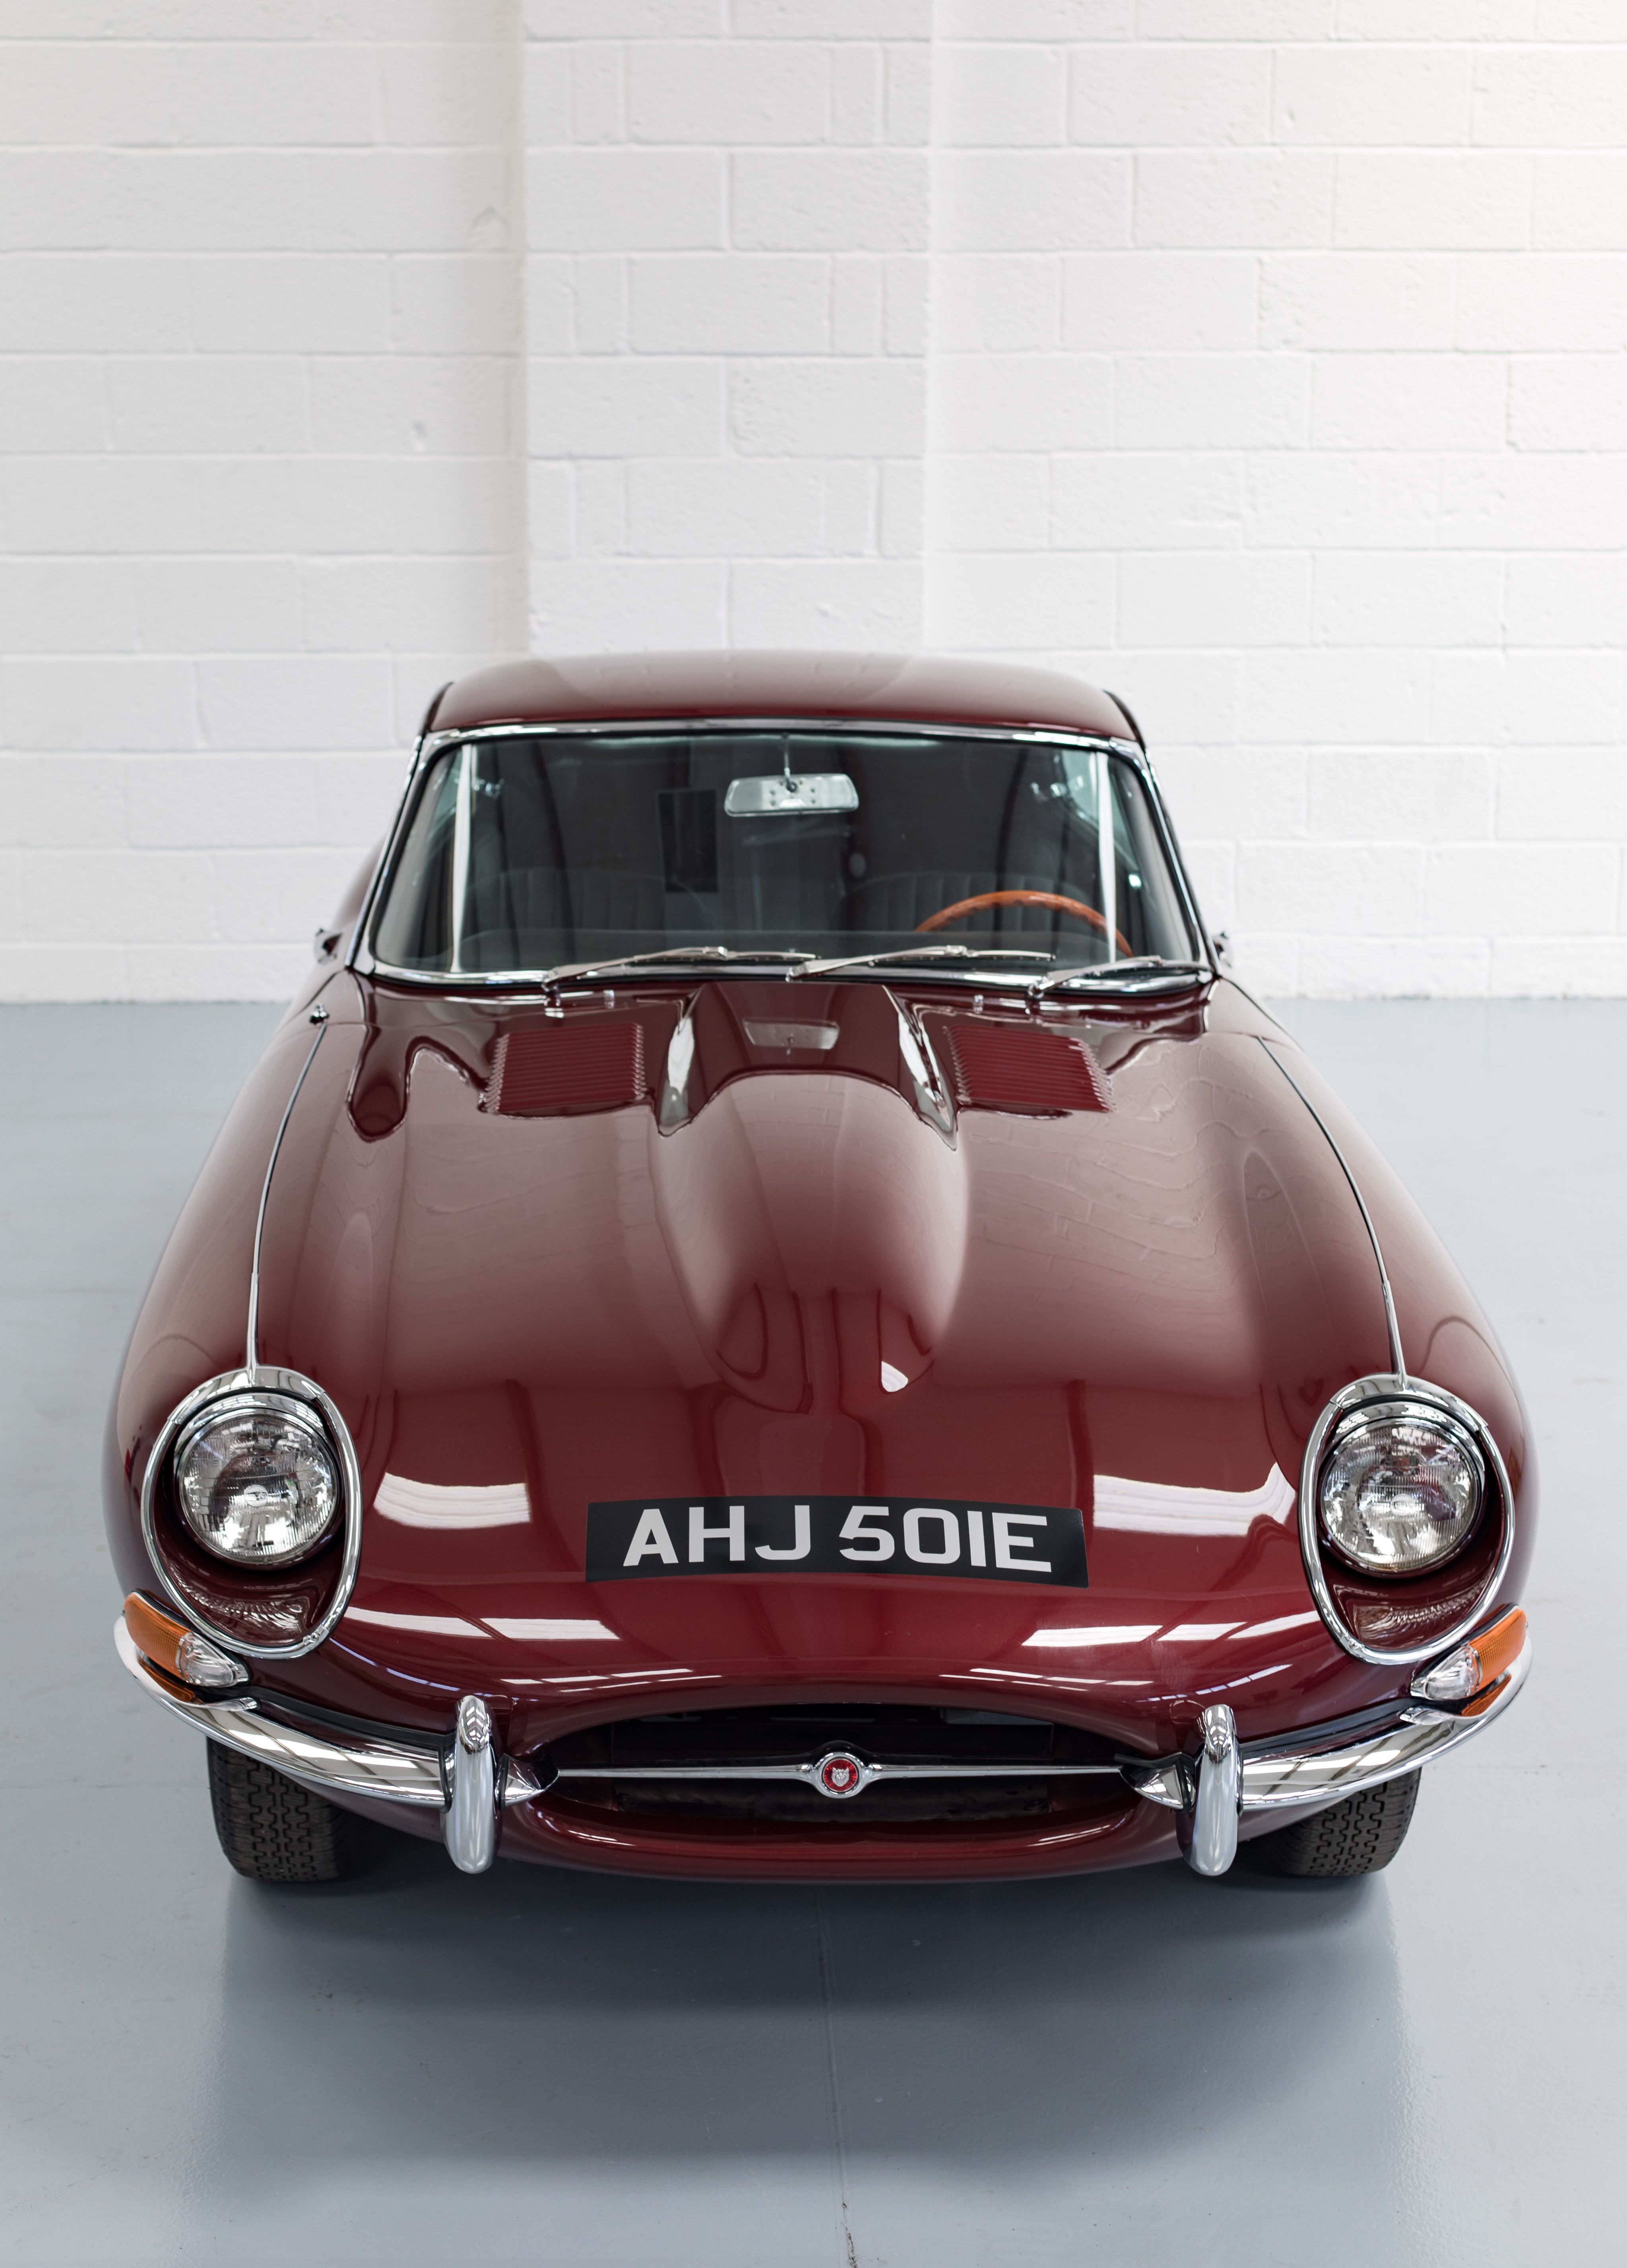 1967 Jaguar E-type Series 1¼ Coupe By Electrogenic